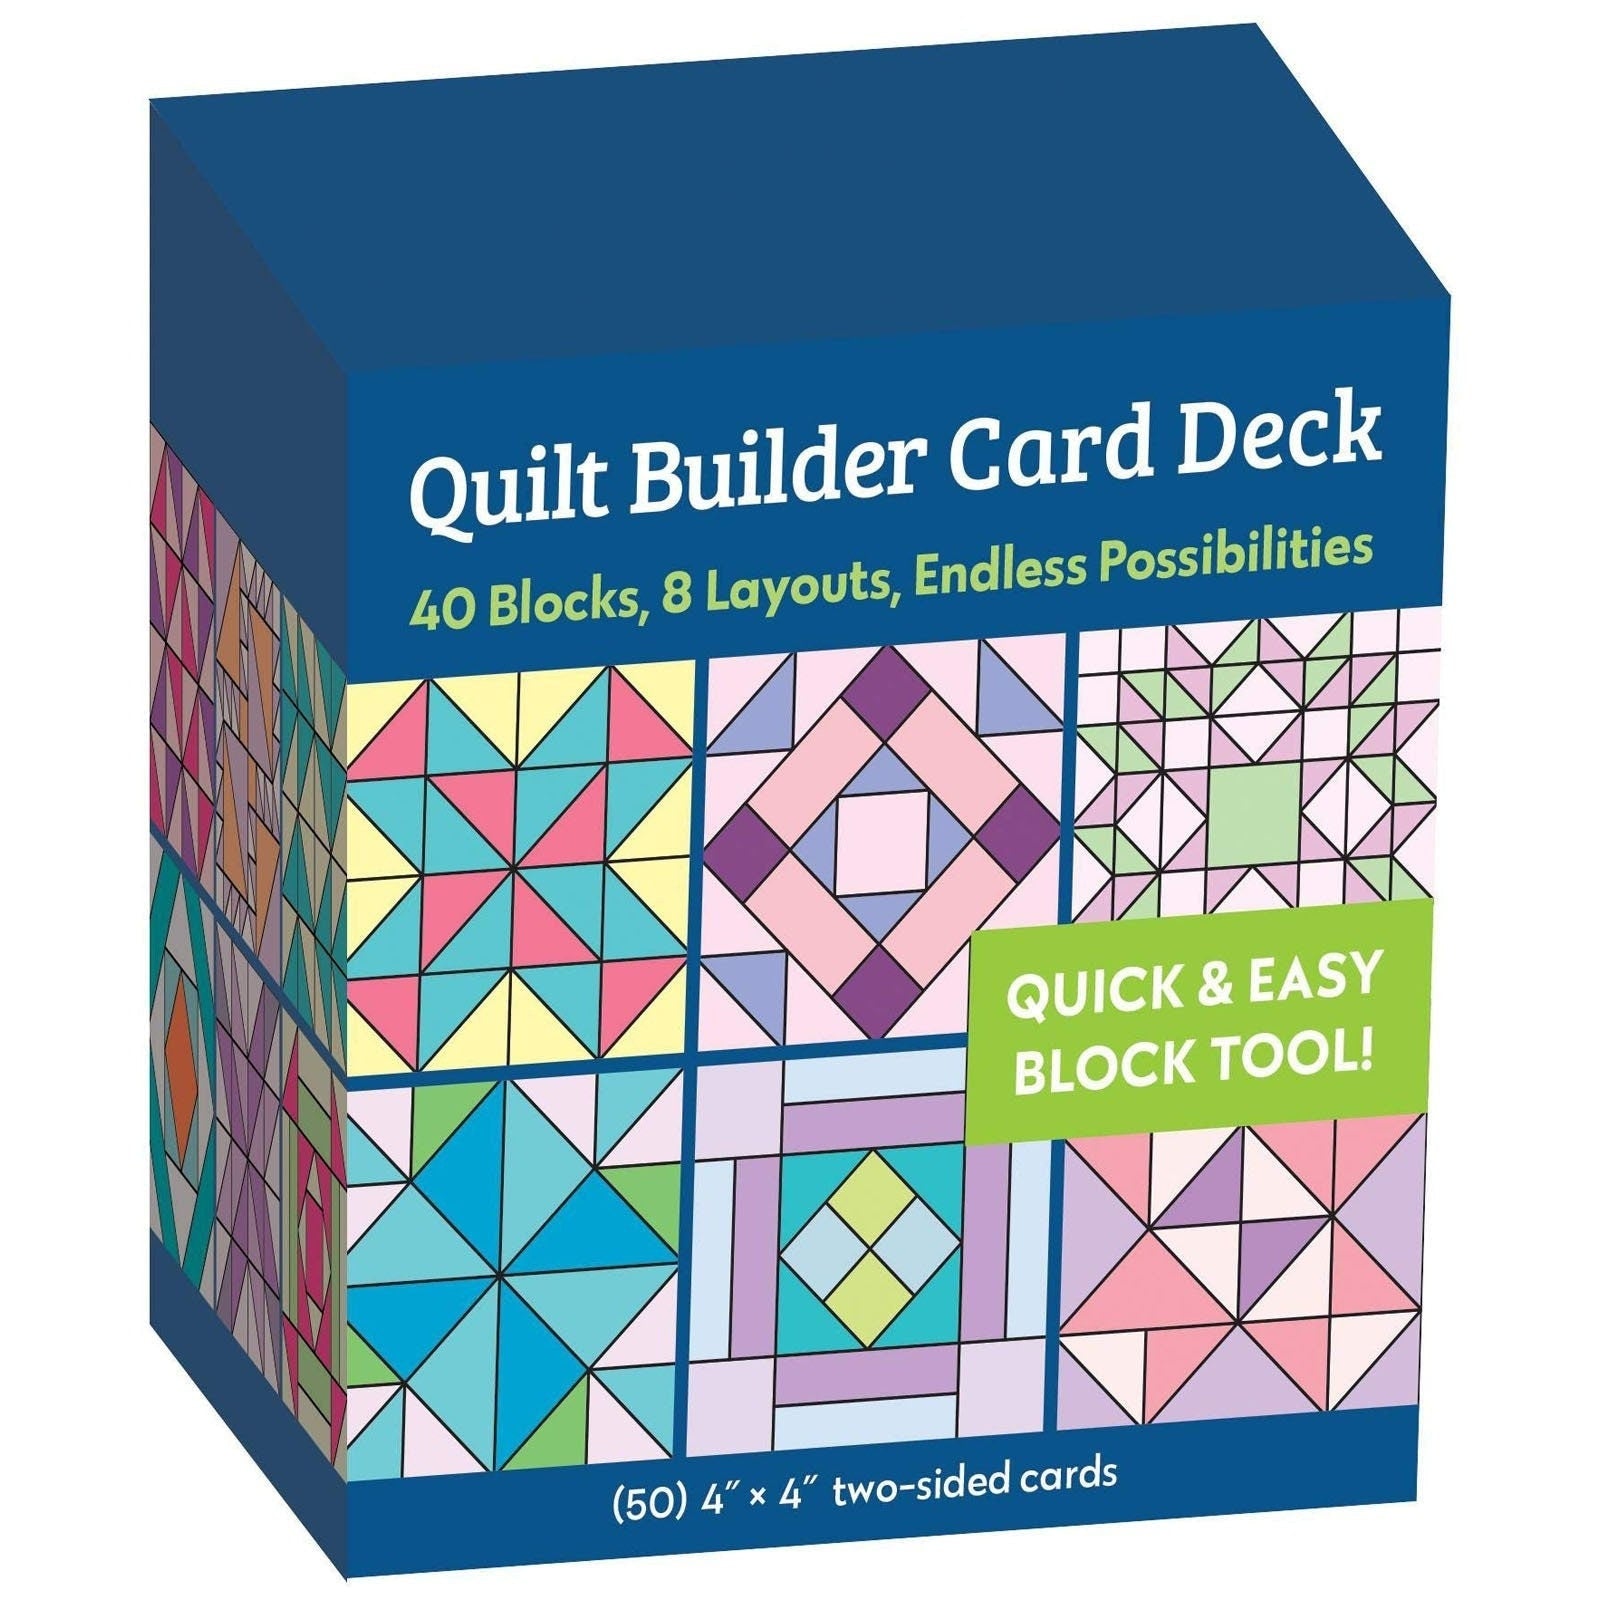 Quilt Builder Card Deck Boxed Set of Quilt Block Patterns with cutting instructions